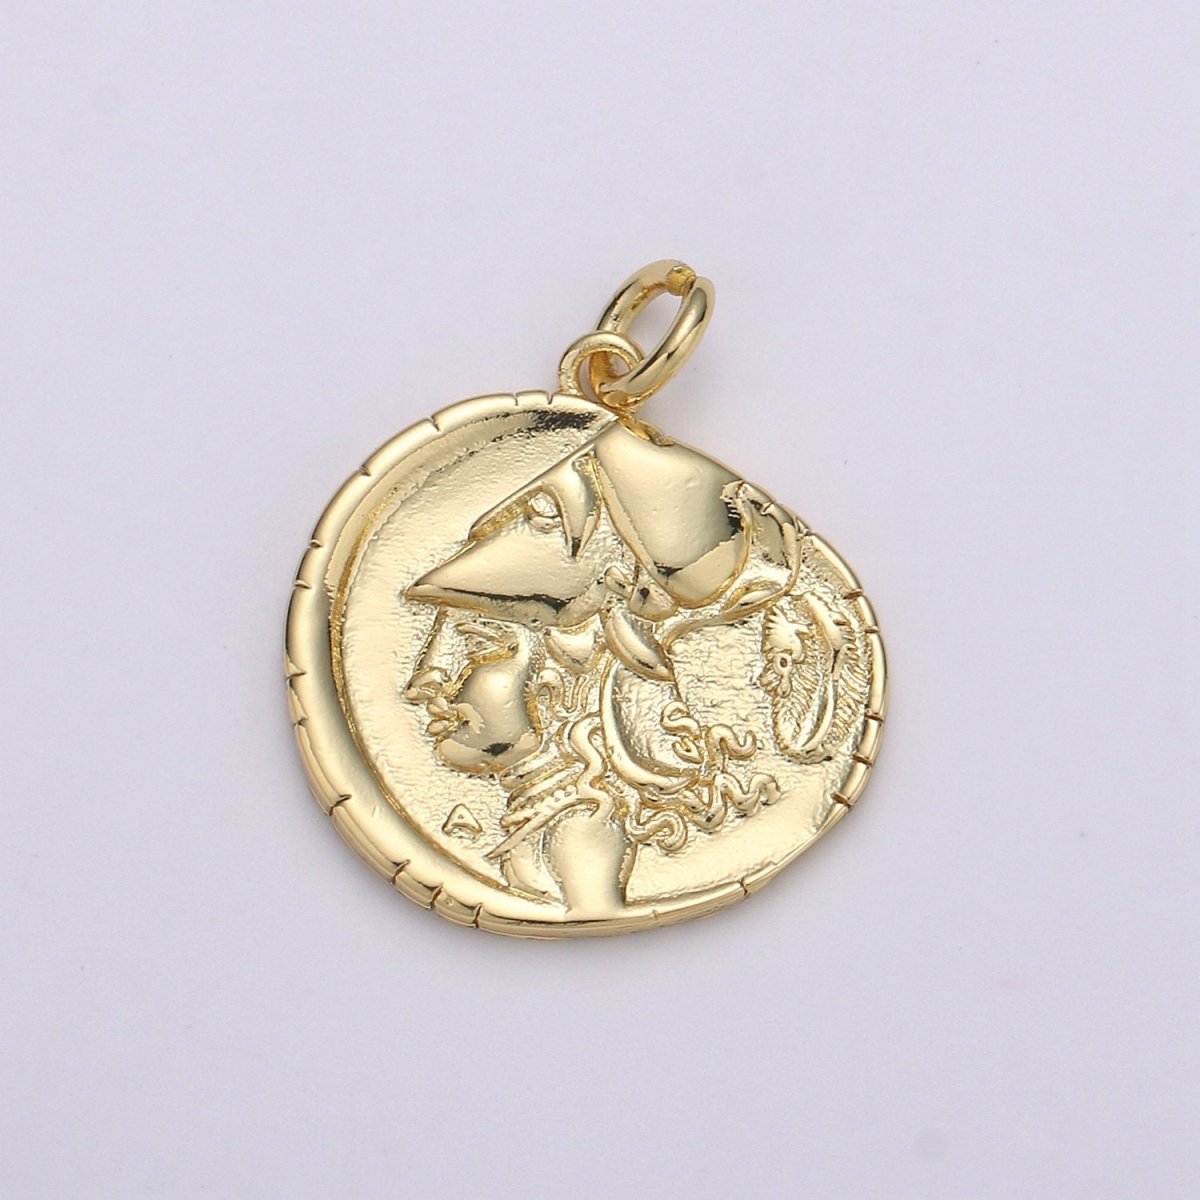 Gold Ancient Roman Rustic Coin Charm Necklace, delicate Layering necklace, Roman Coin Ancient Greek Jewelry good luck amulet gift D-150 - DLUXCA